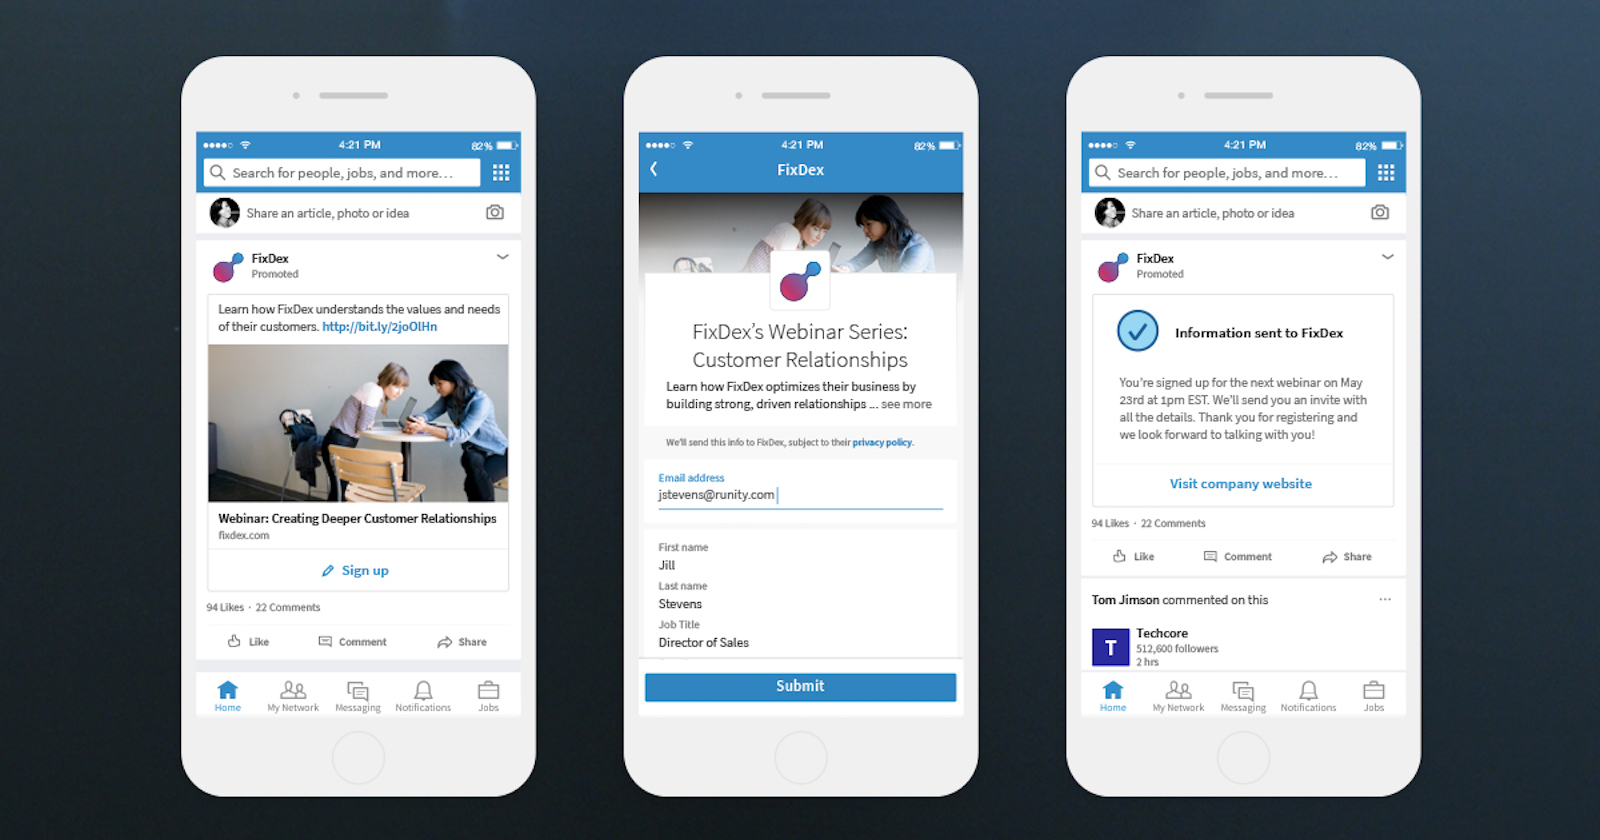 LinkedIn Launches Lead Gen Forms